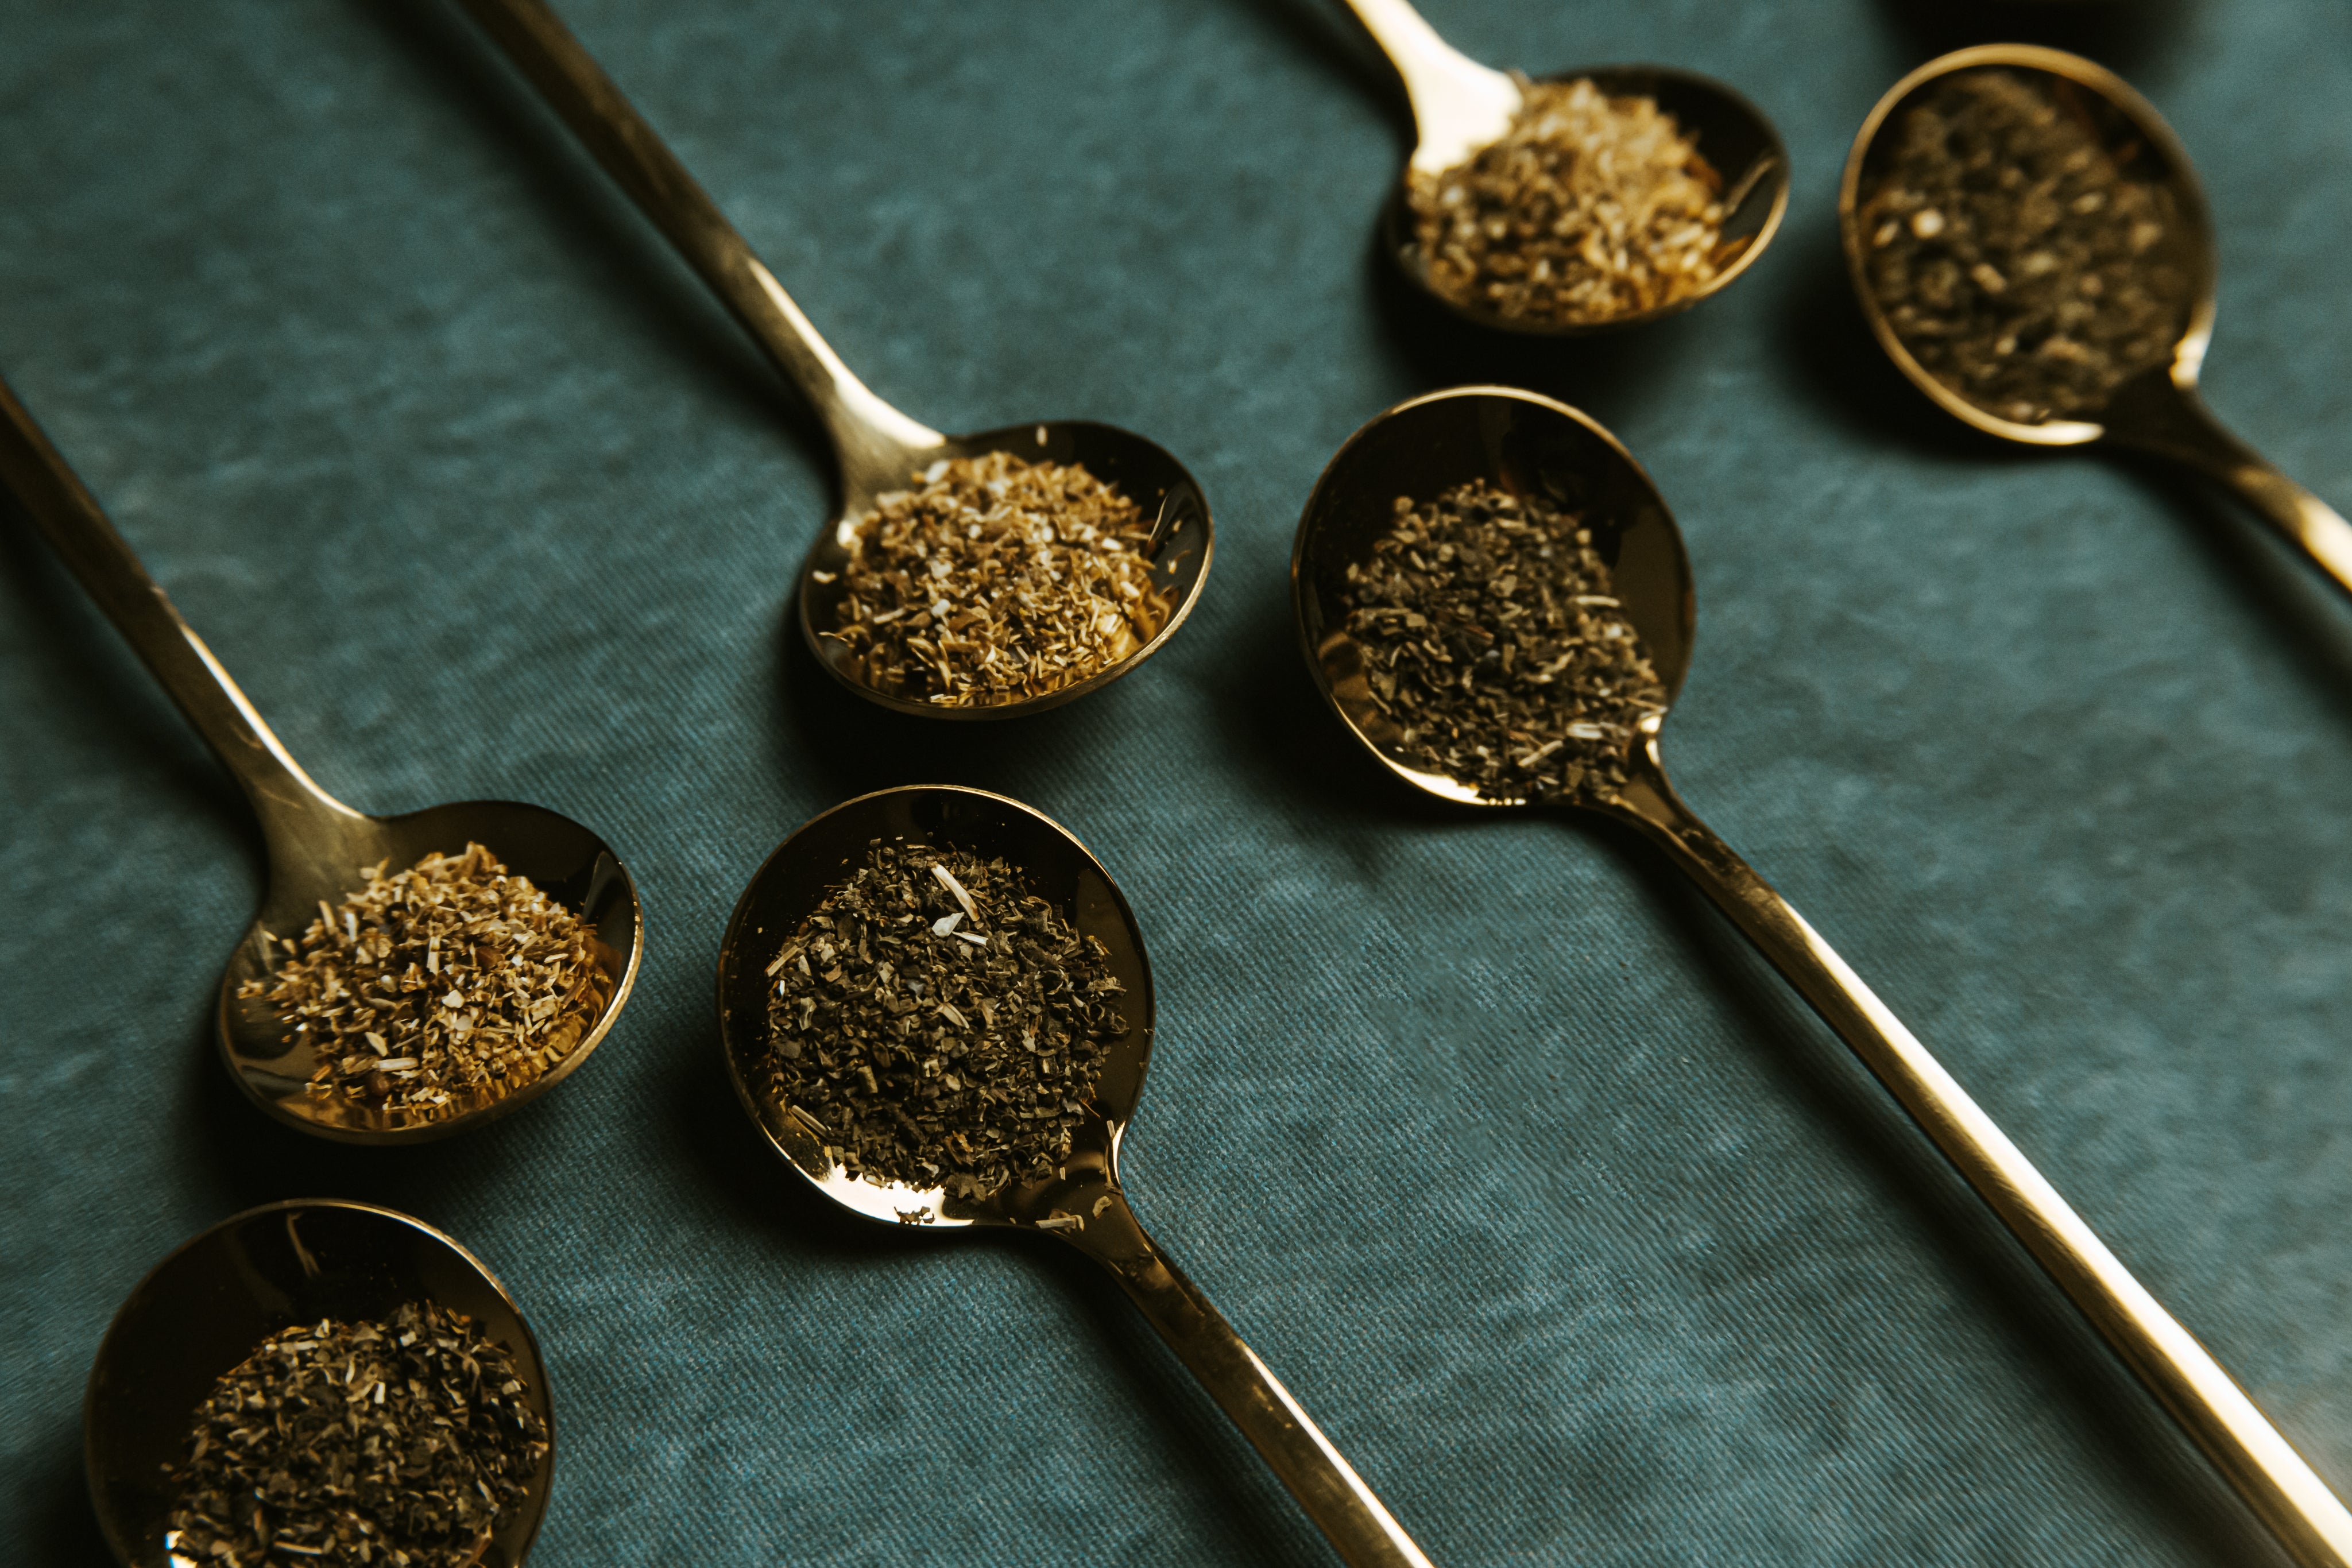 files/gold-spoons-in-a-row-filled-with-loose-leaf-tea.jpg